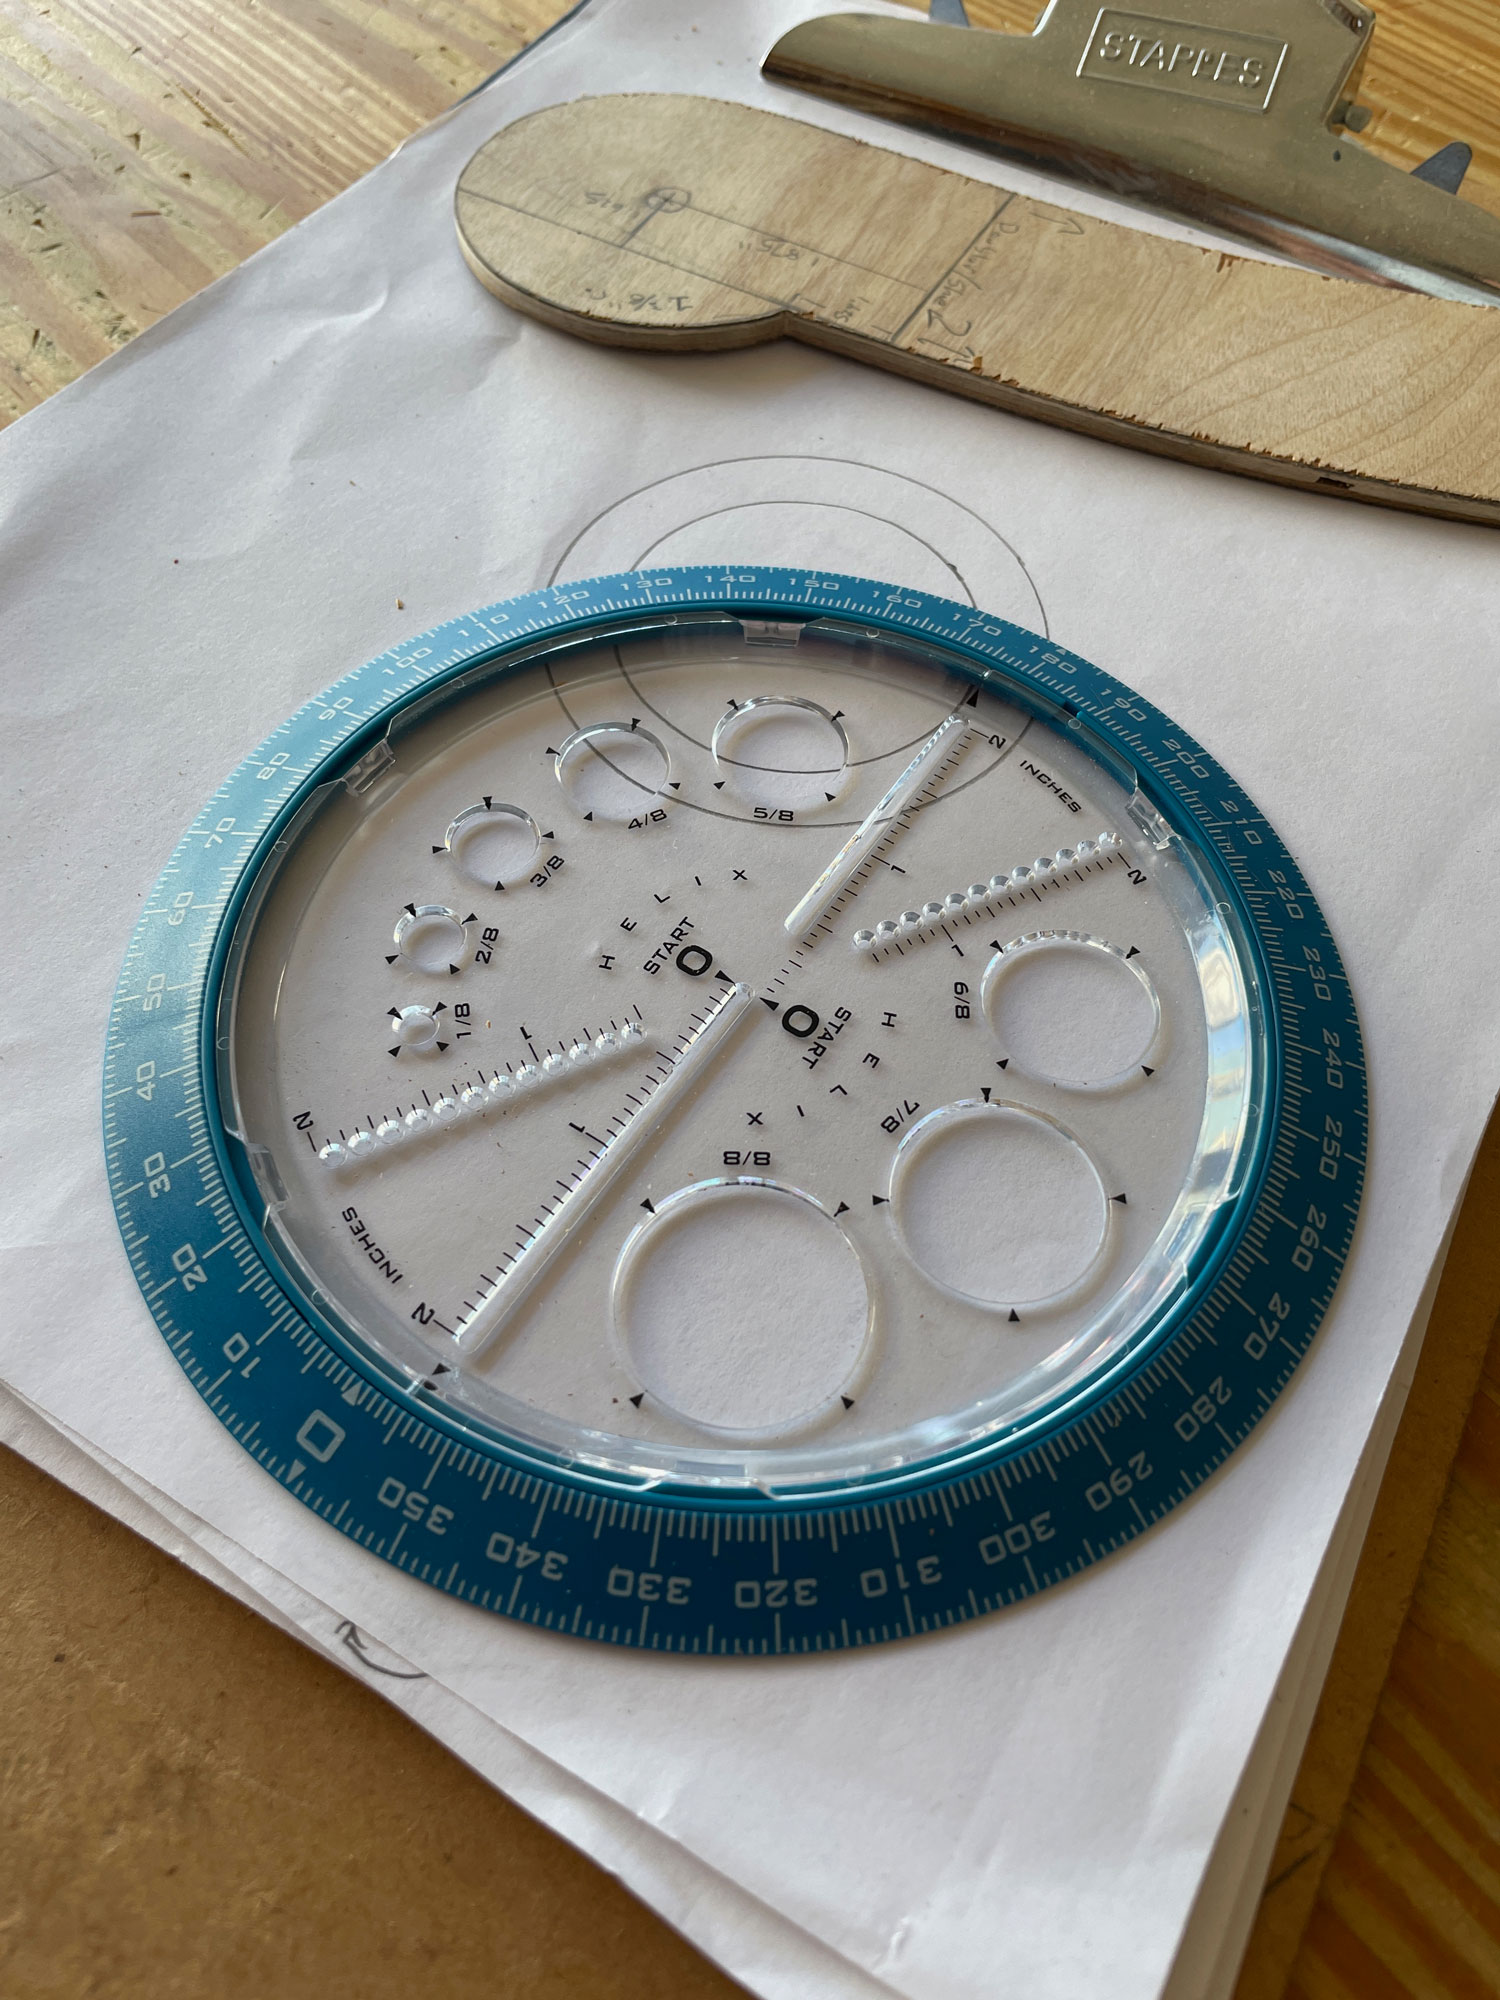 0-360 Degree Stainless Steel Dial Protractor Professional Supplier - China  Dial Protractor, Stainless Steel Vernier Protractor | Made-in-China.com